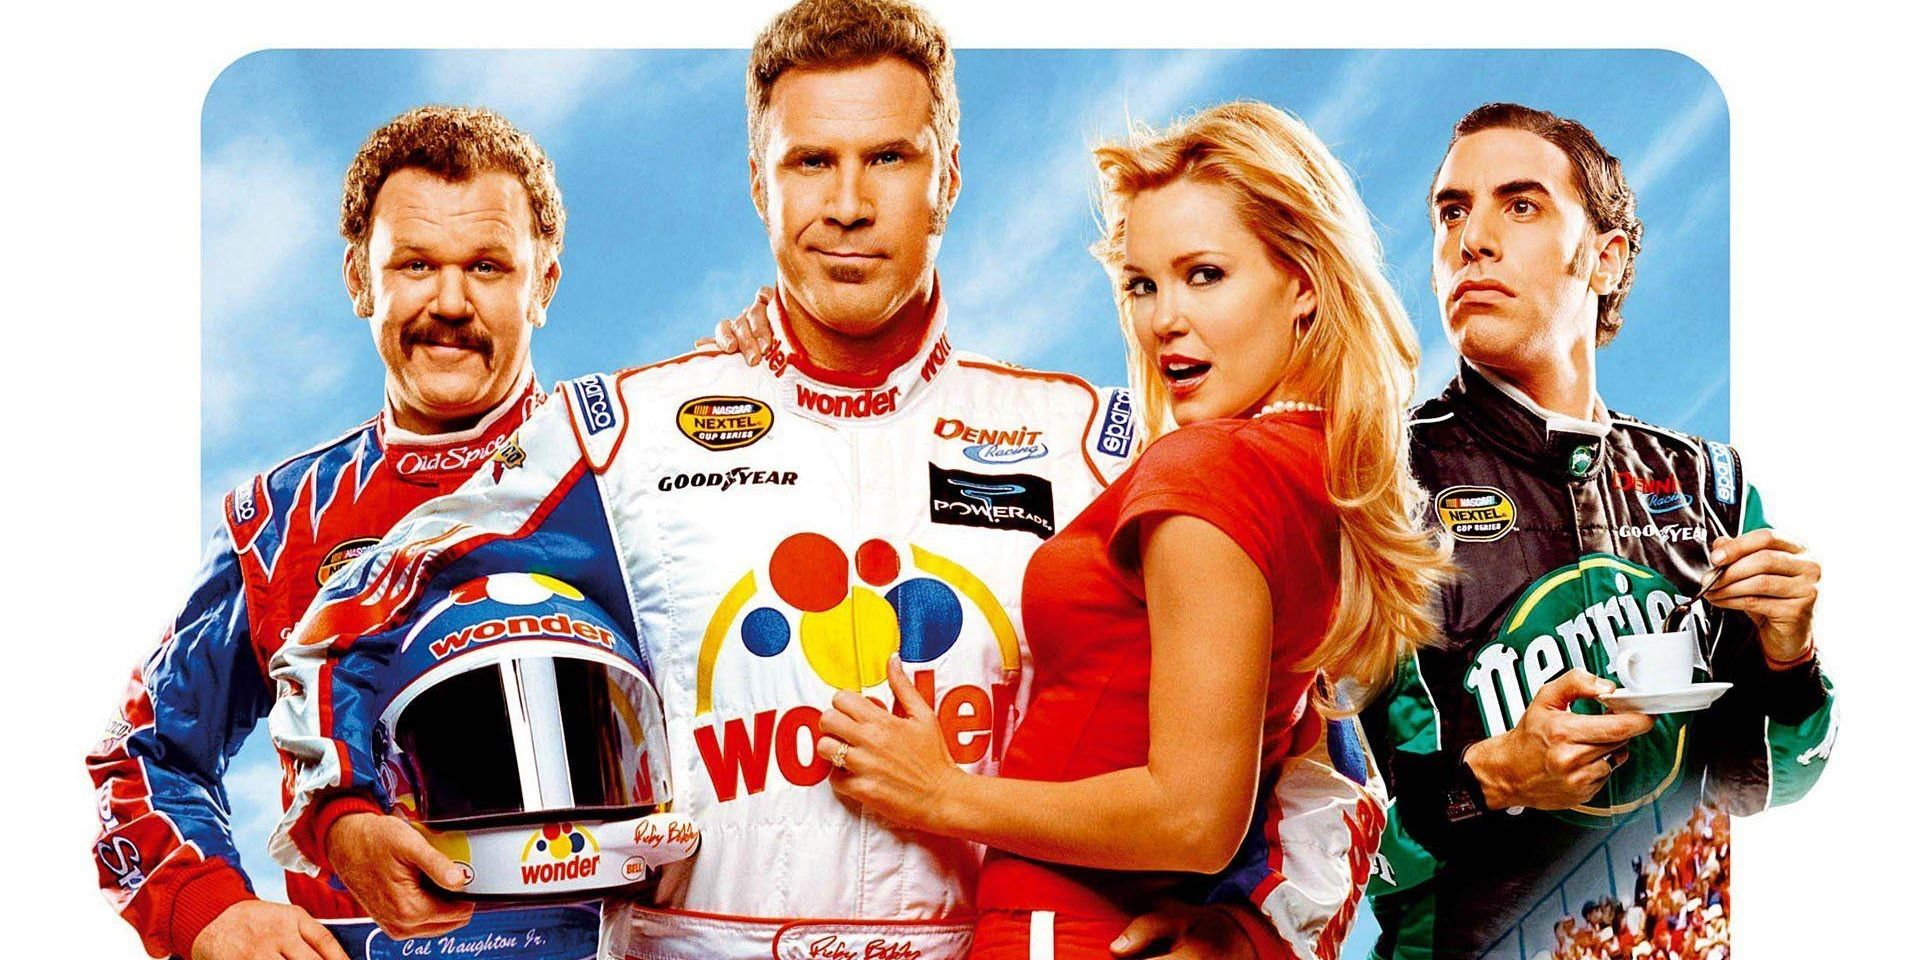 The poster for Talladega Nights